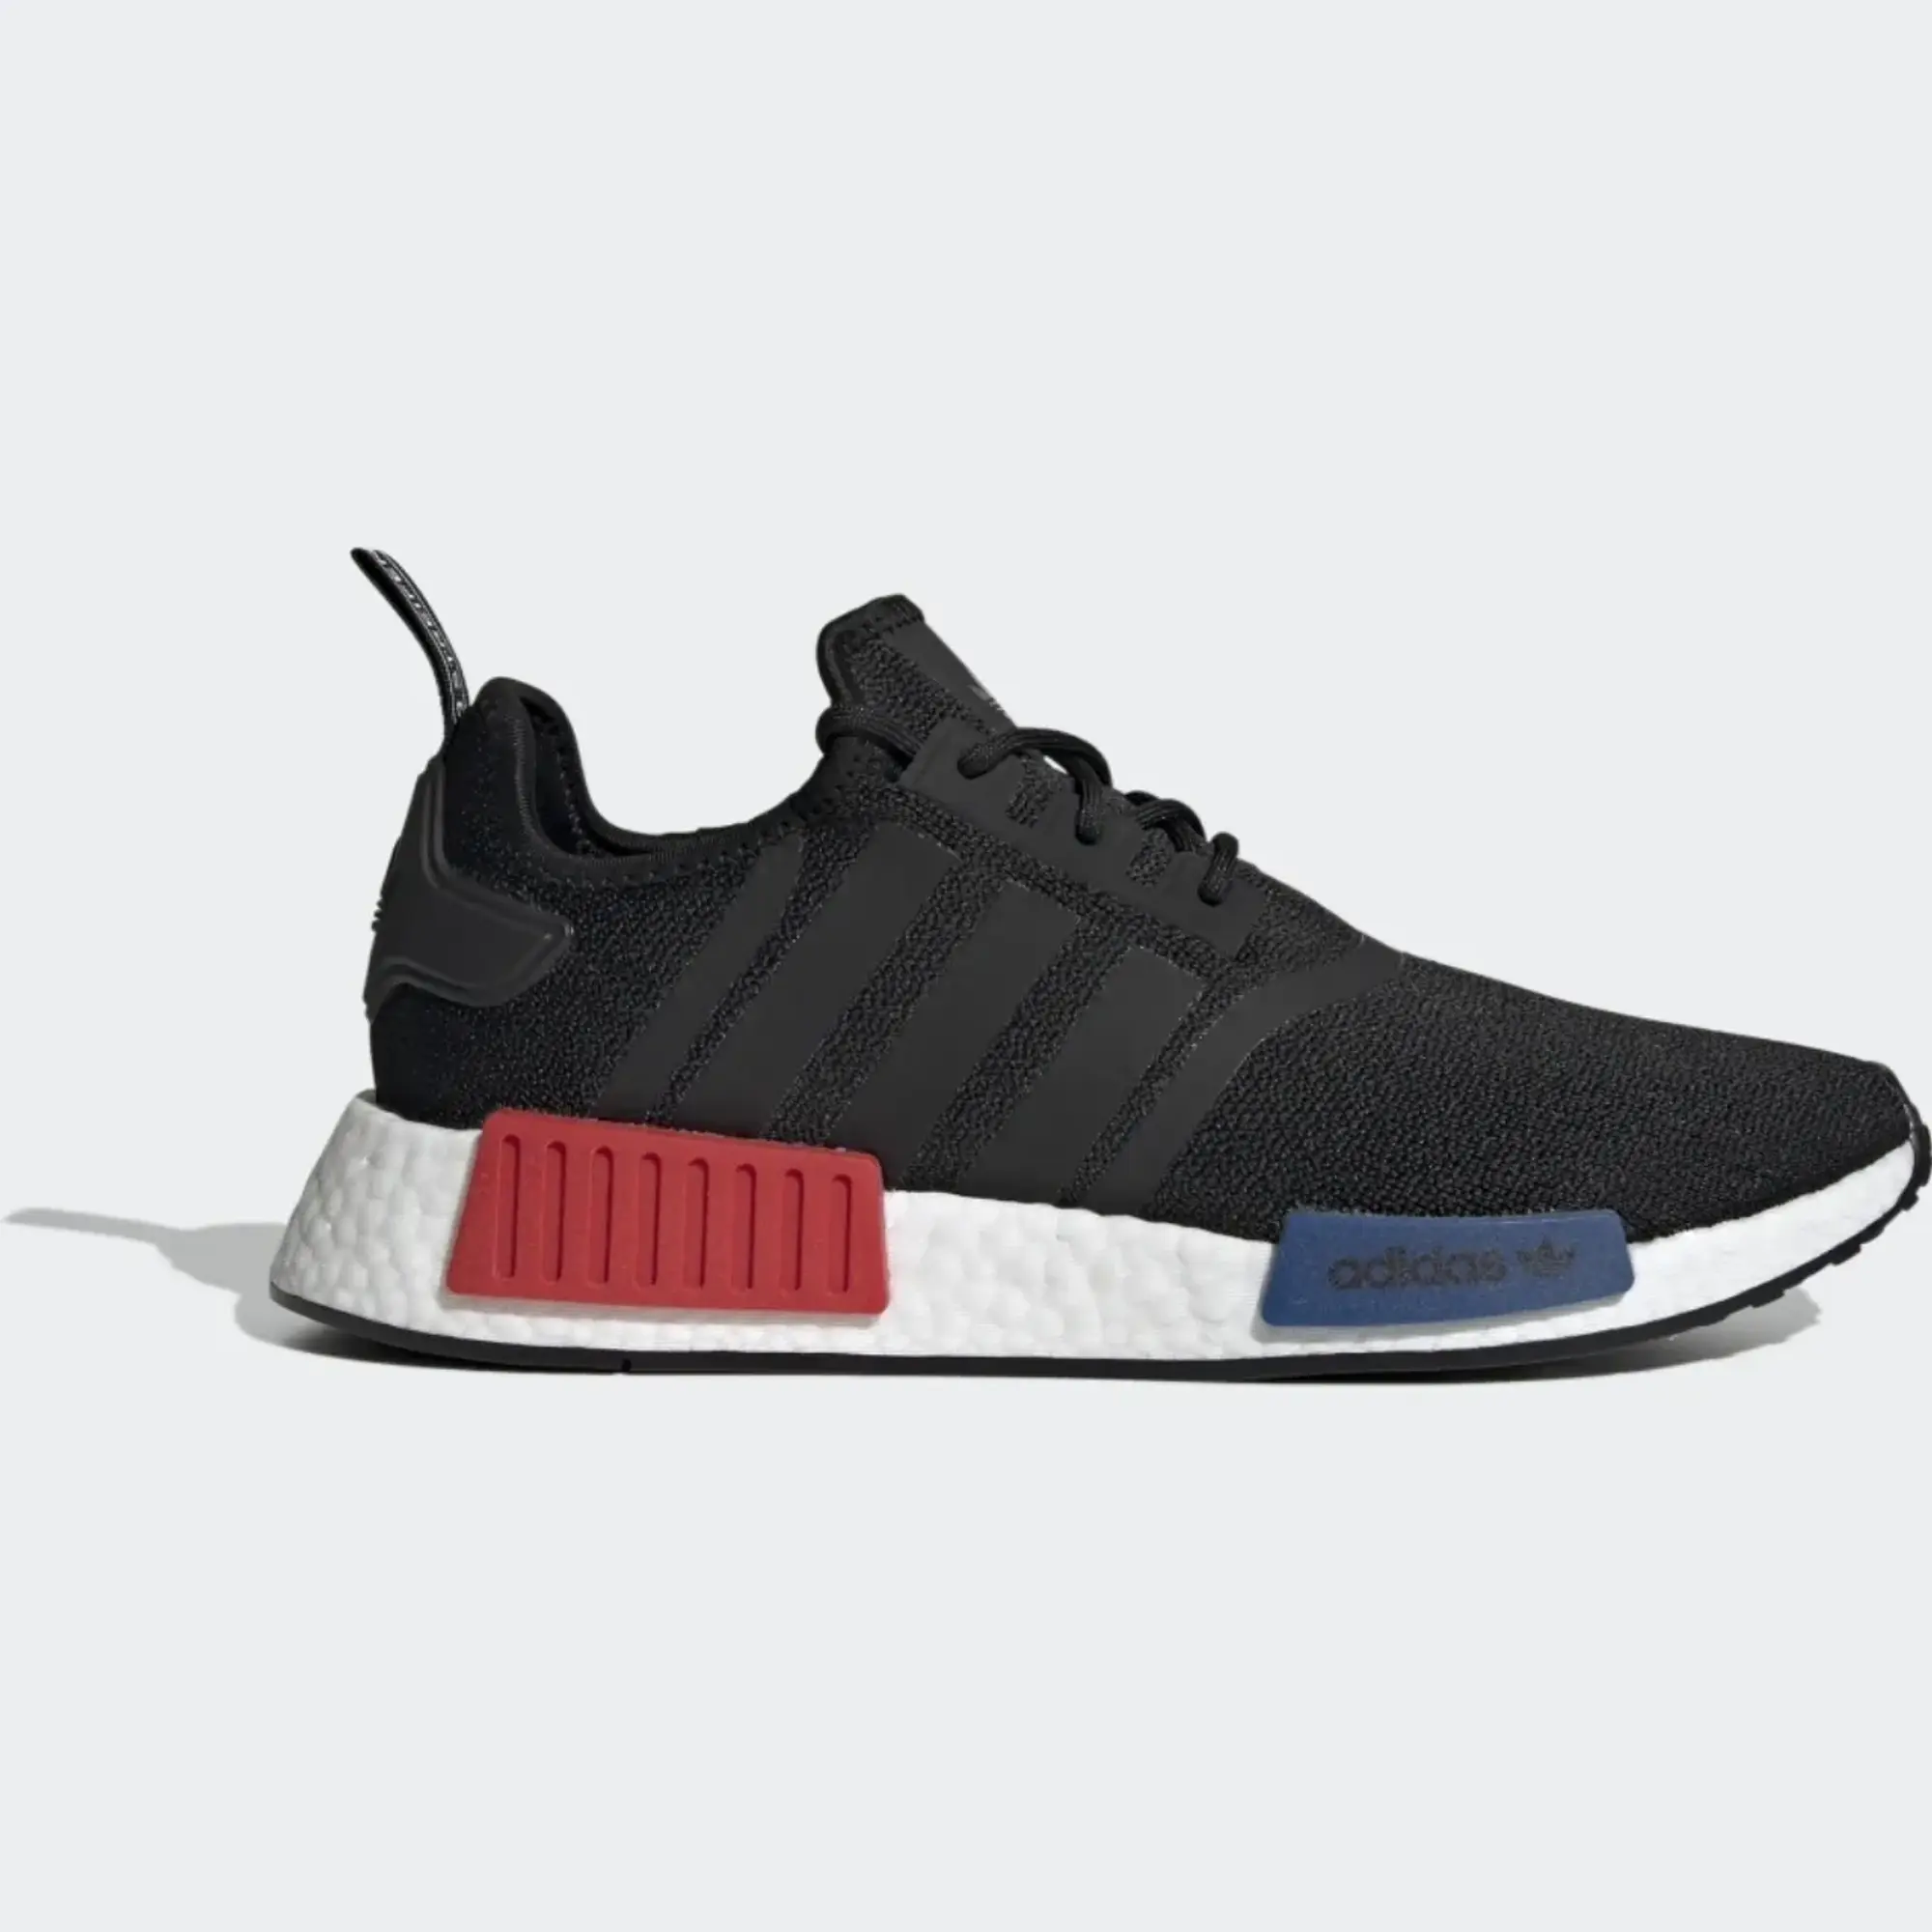 Adidas Originals Nmd R1 Trainers In Black With Red And Blue Tab Detail